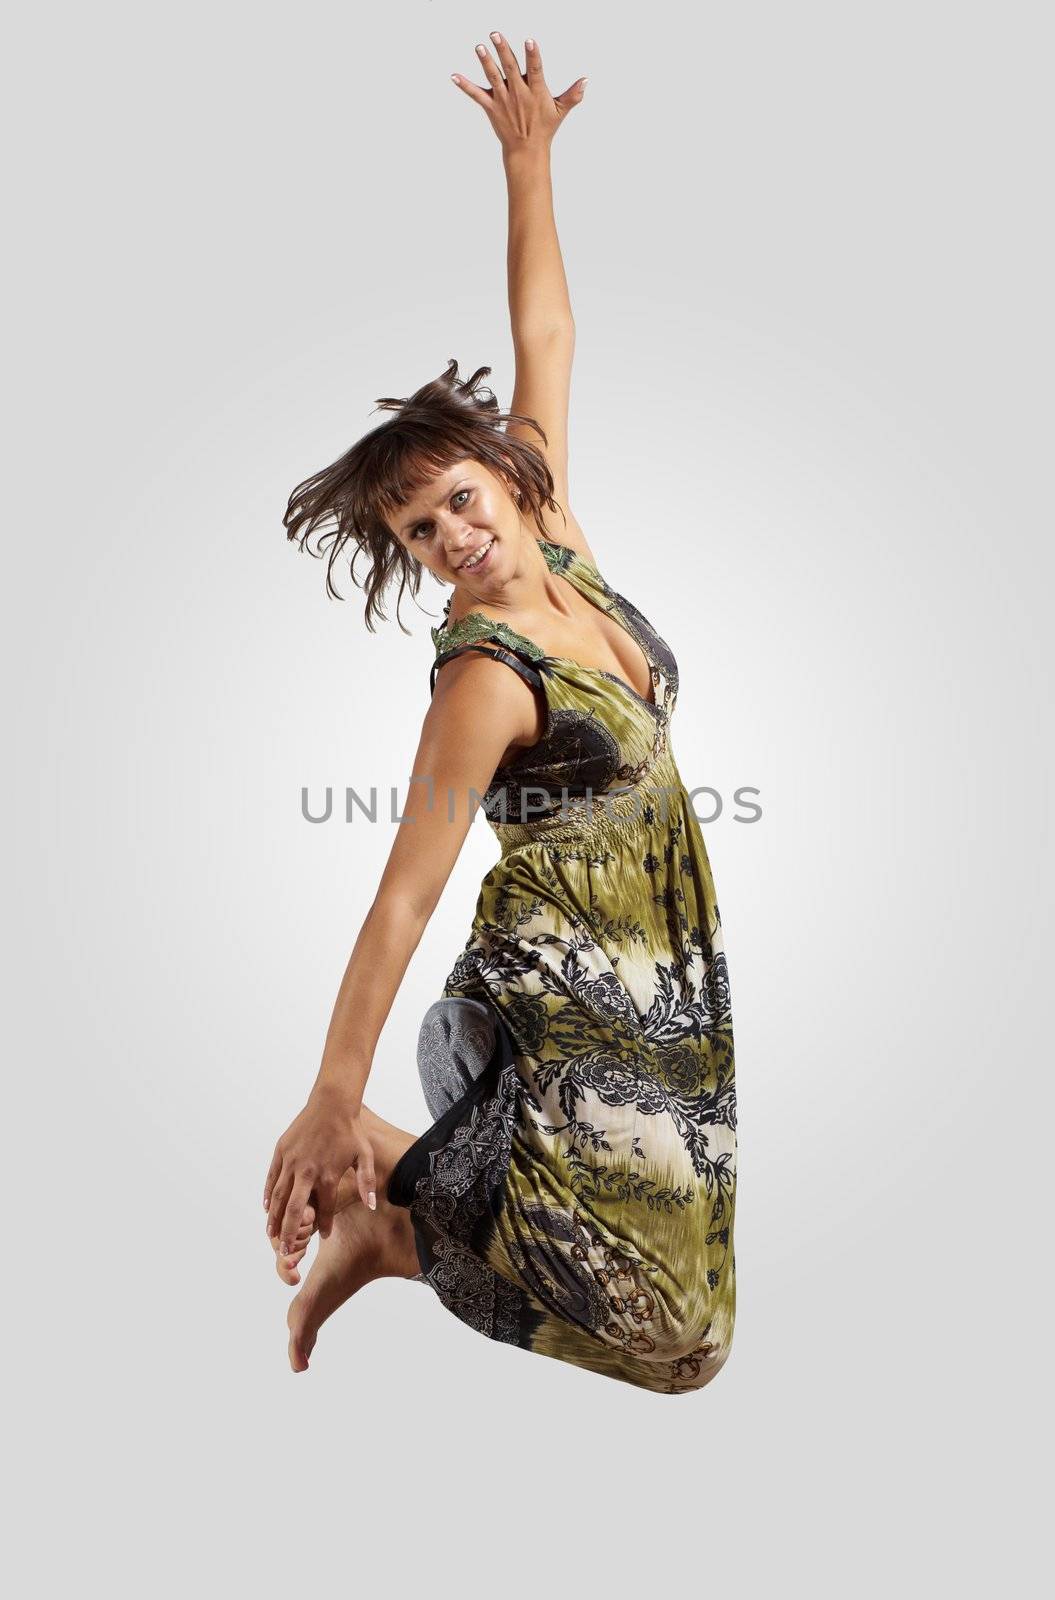 pretty modern slim hip-hop style woman jumping dancing on a grey background